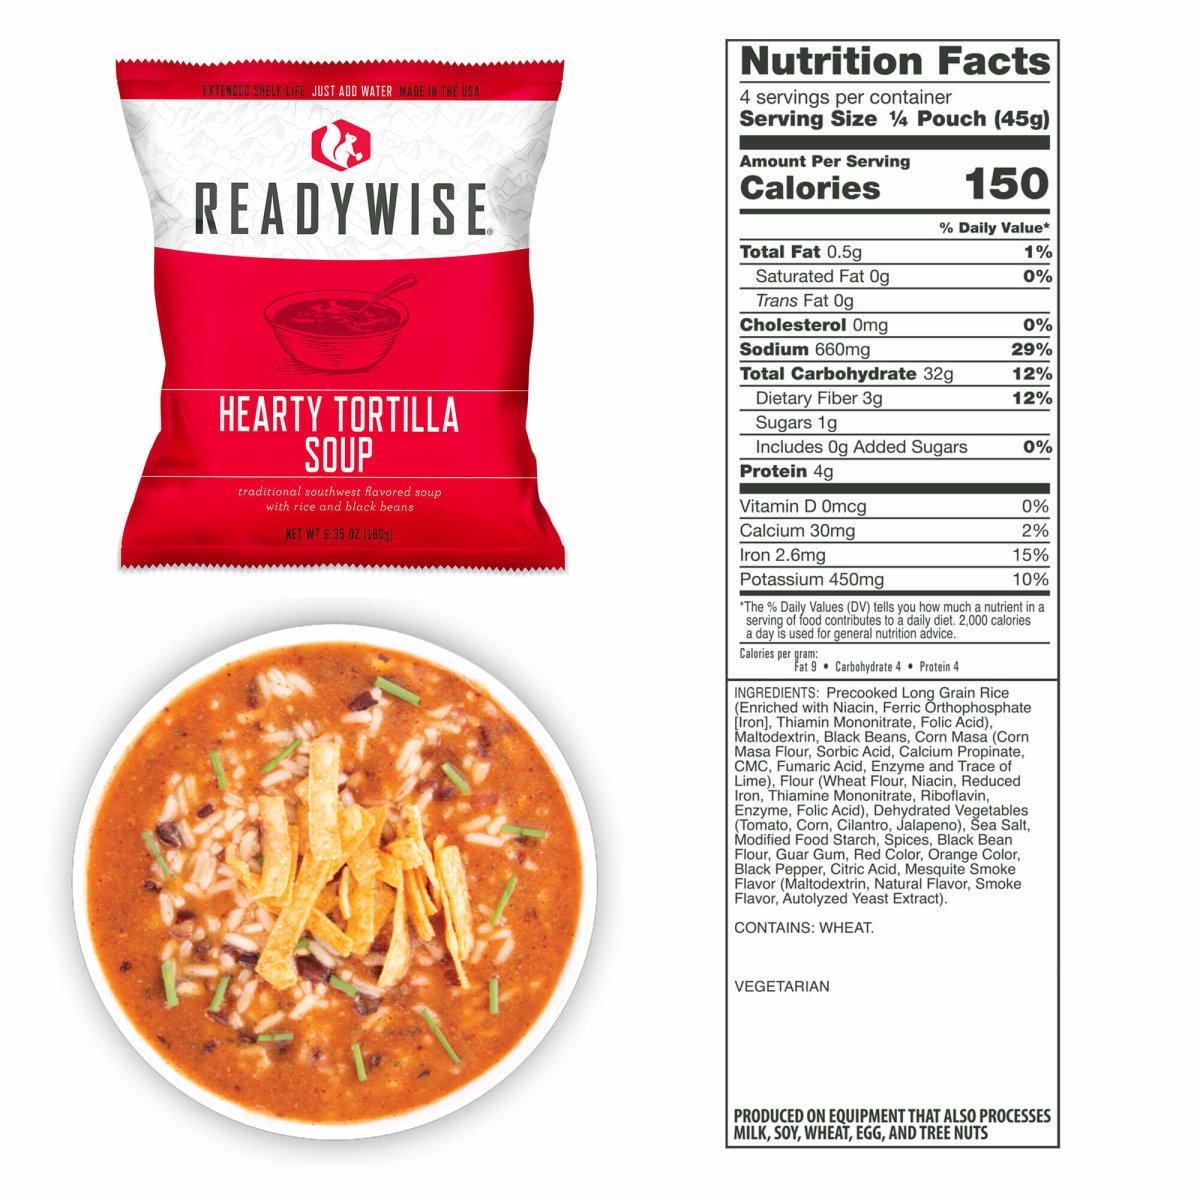 120 Serving Emergency Food Supply - ReadyWise at Uppercut Tactical